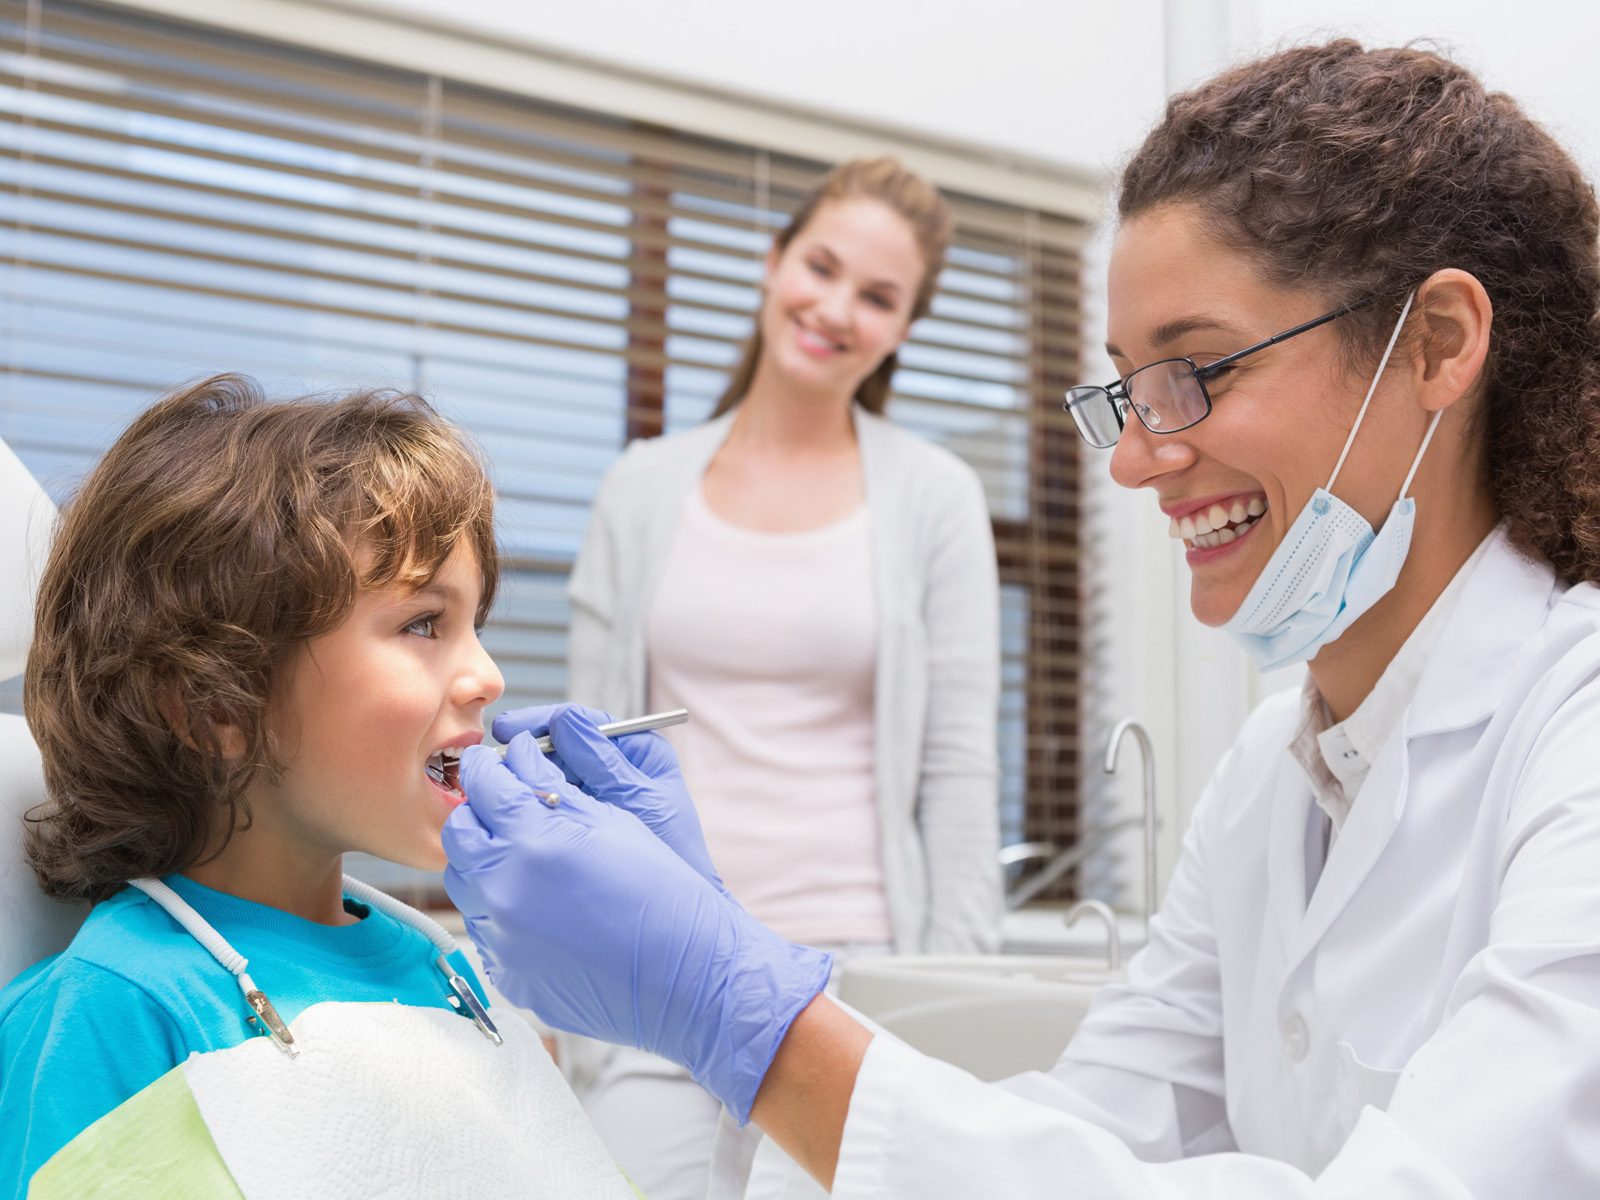 What are the pediatric dental care services?